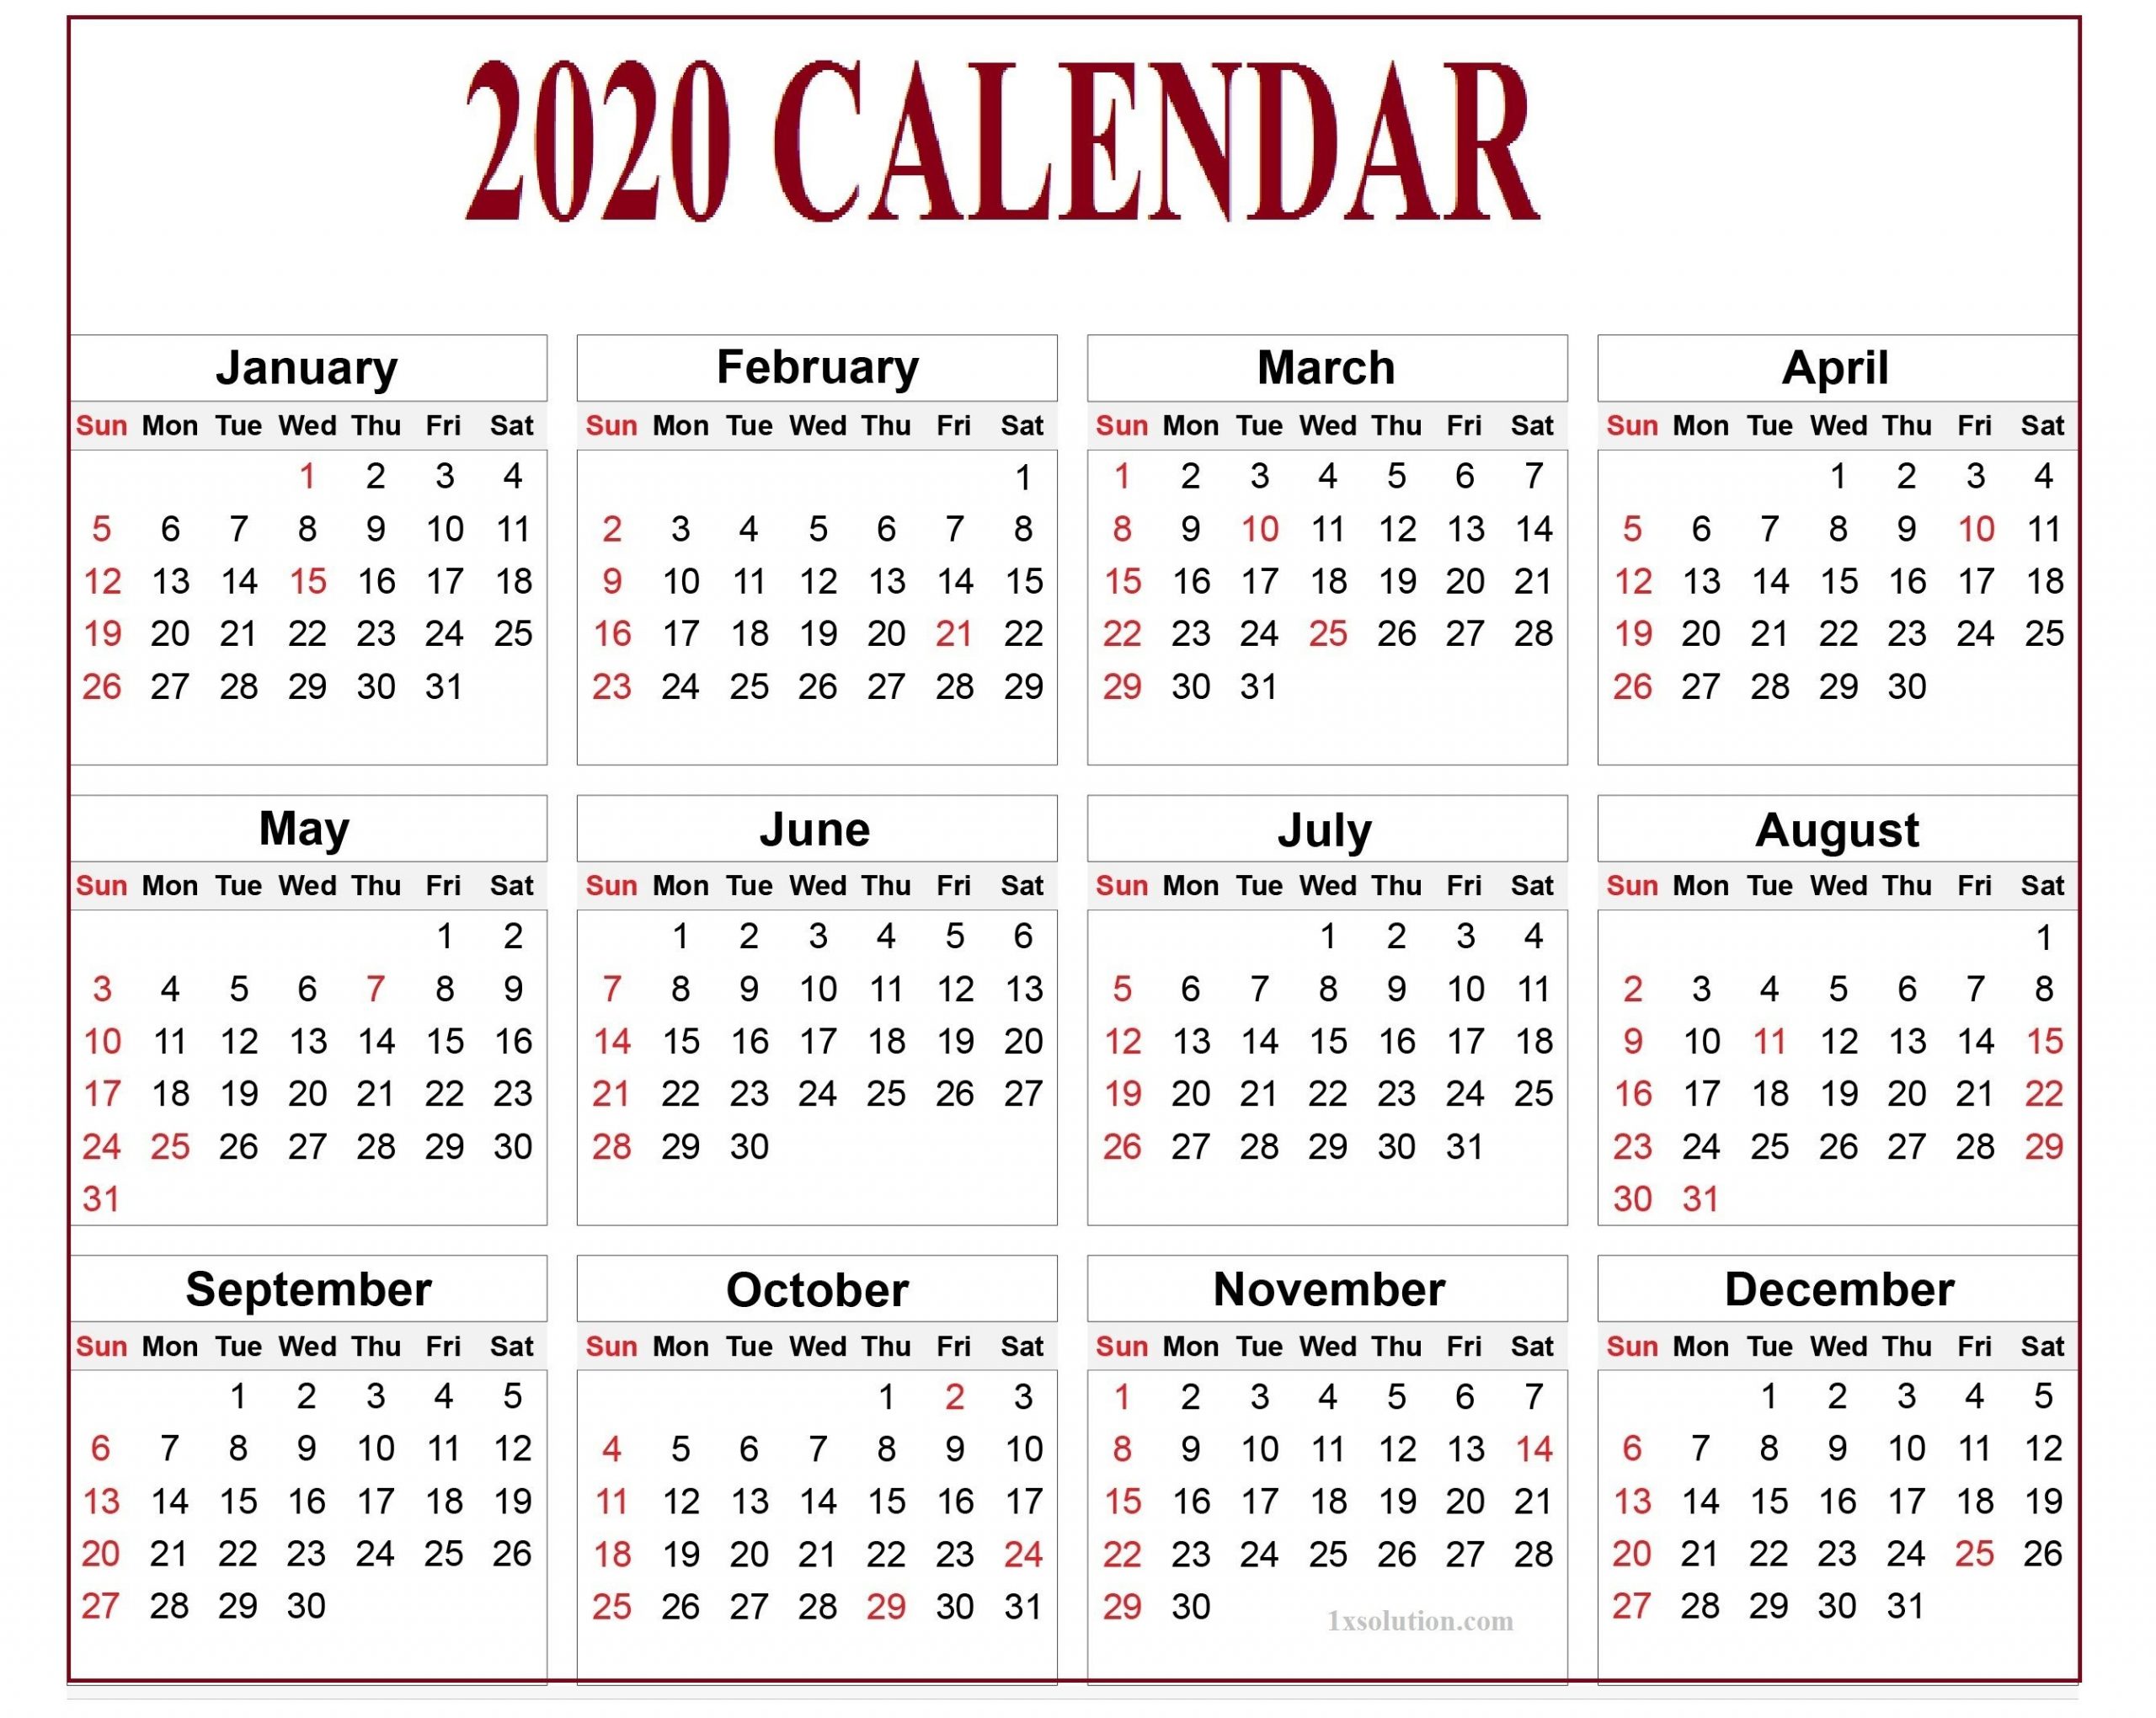 2020 daily calendar to write your important notes